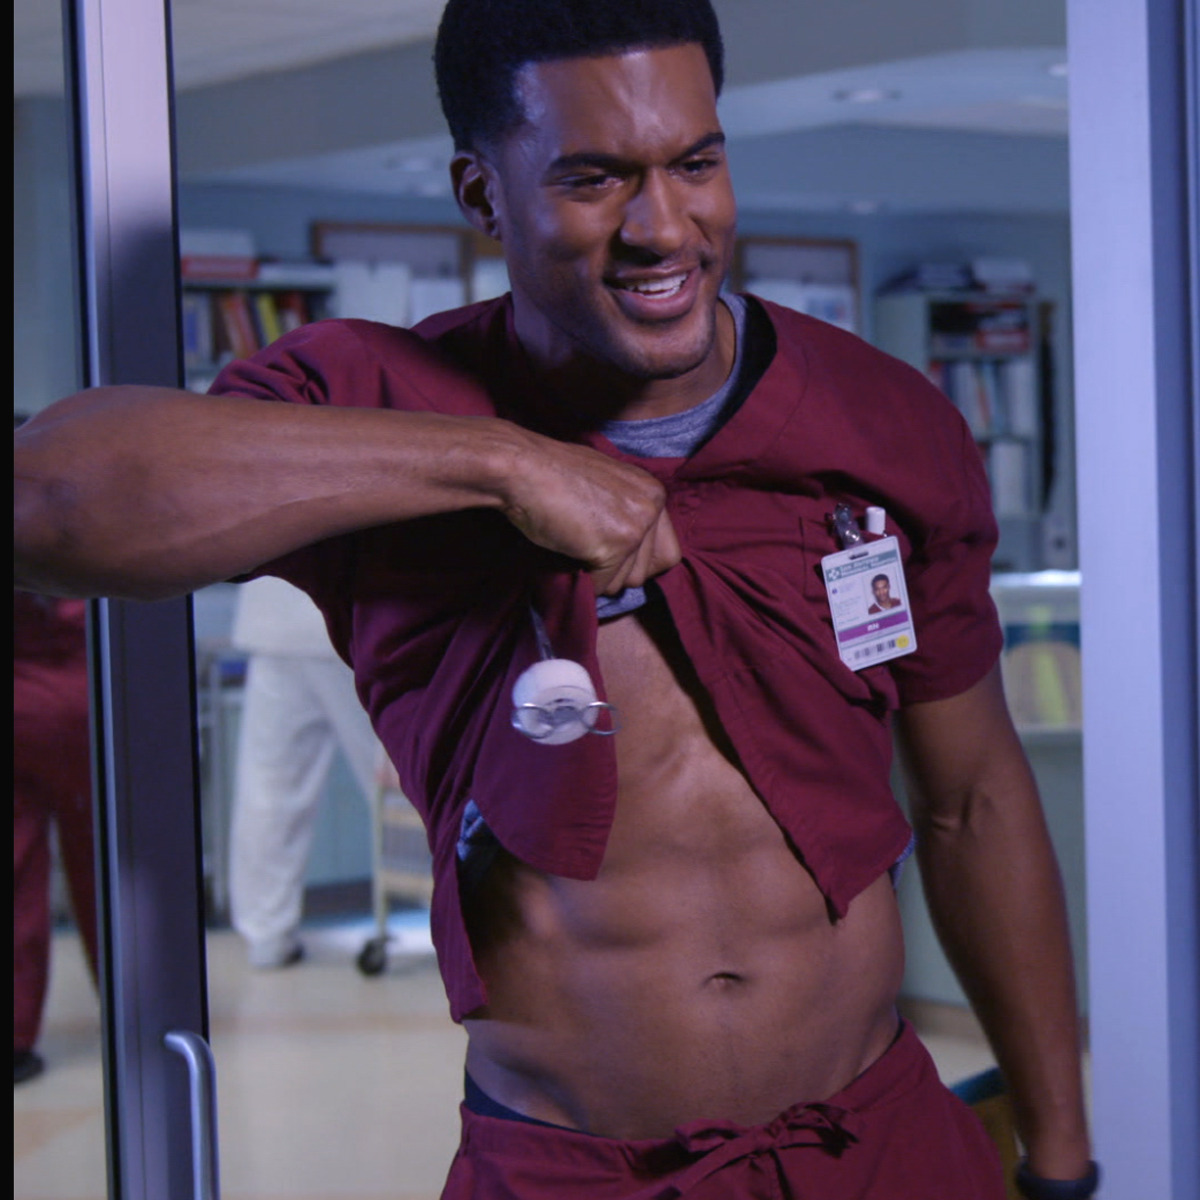 nbcnightshift:  Kenny’s abs stole the show!  Watch the latest Night Shift episode